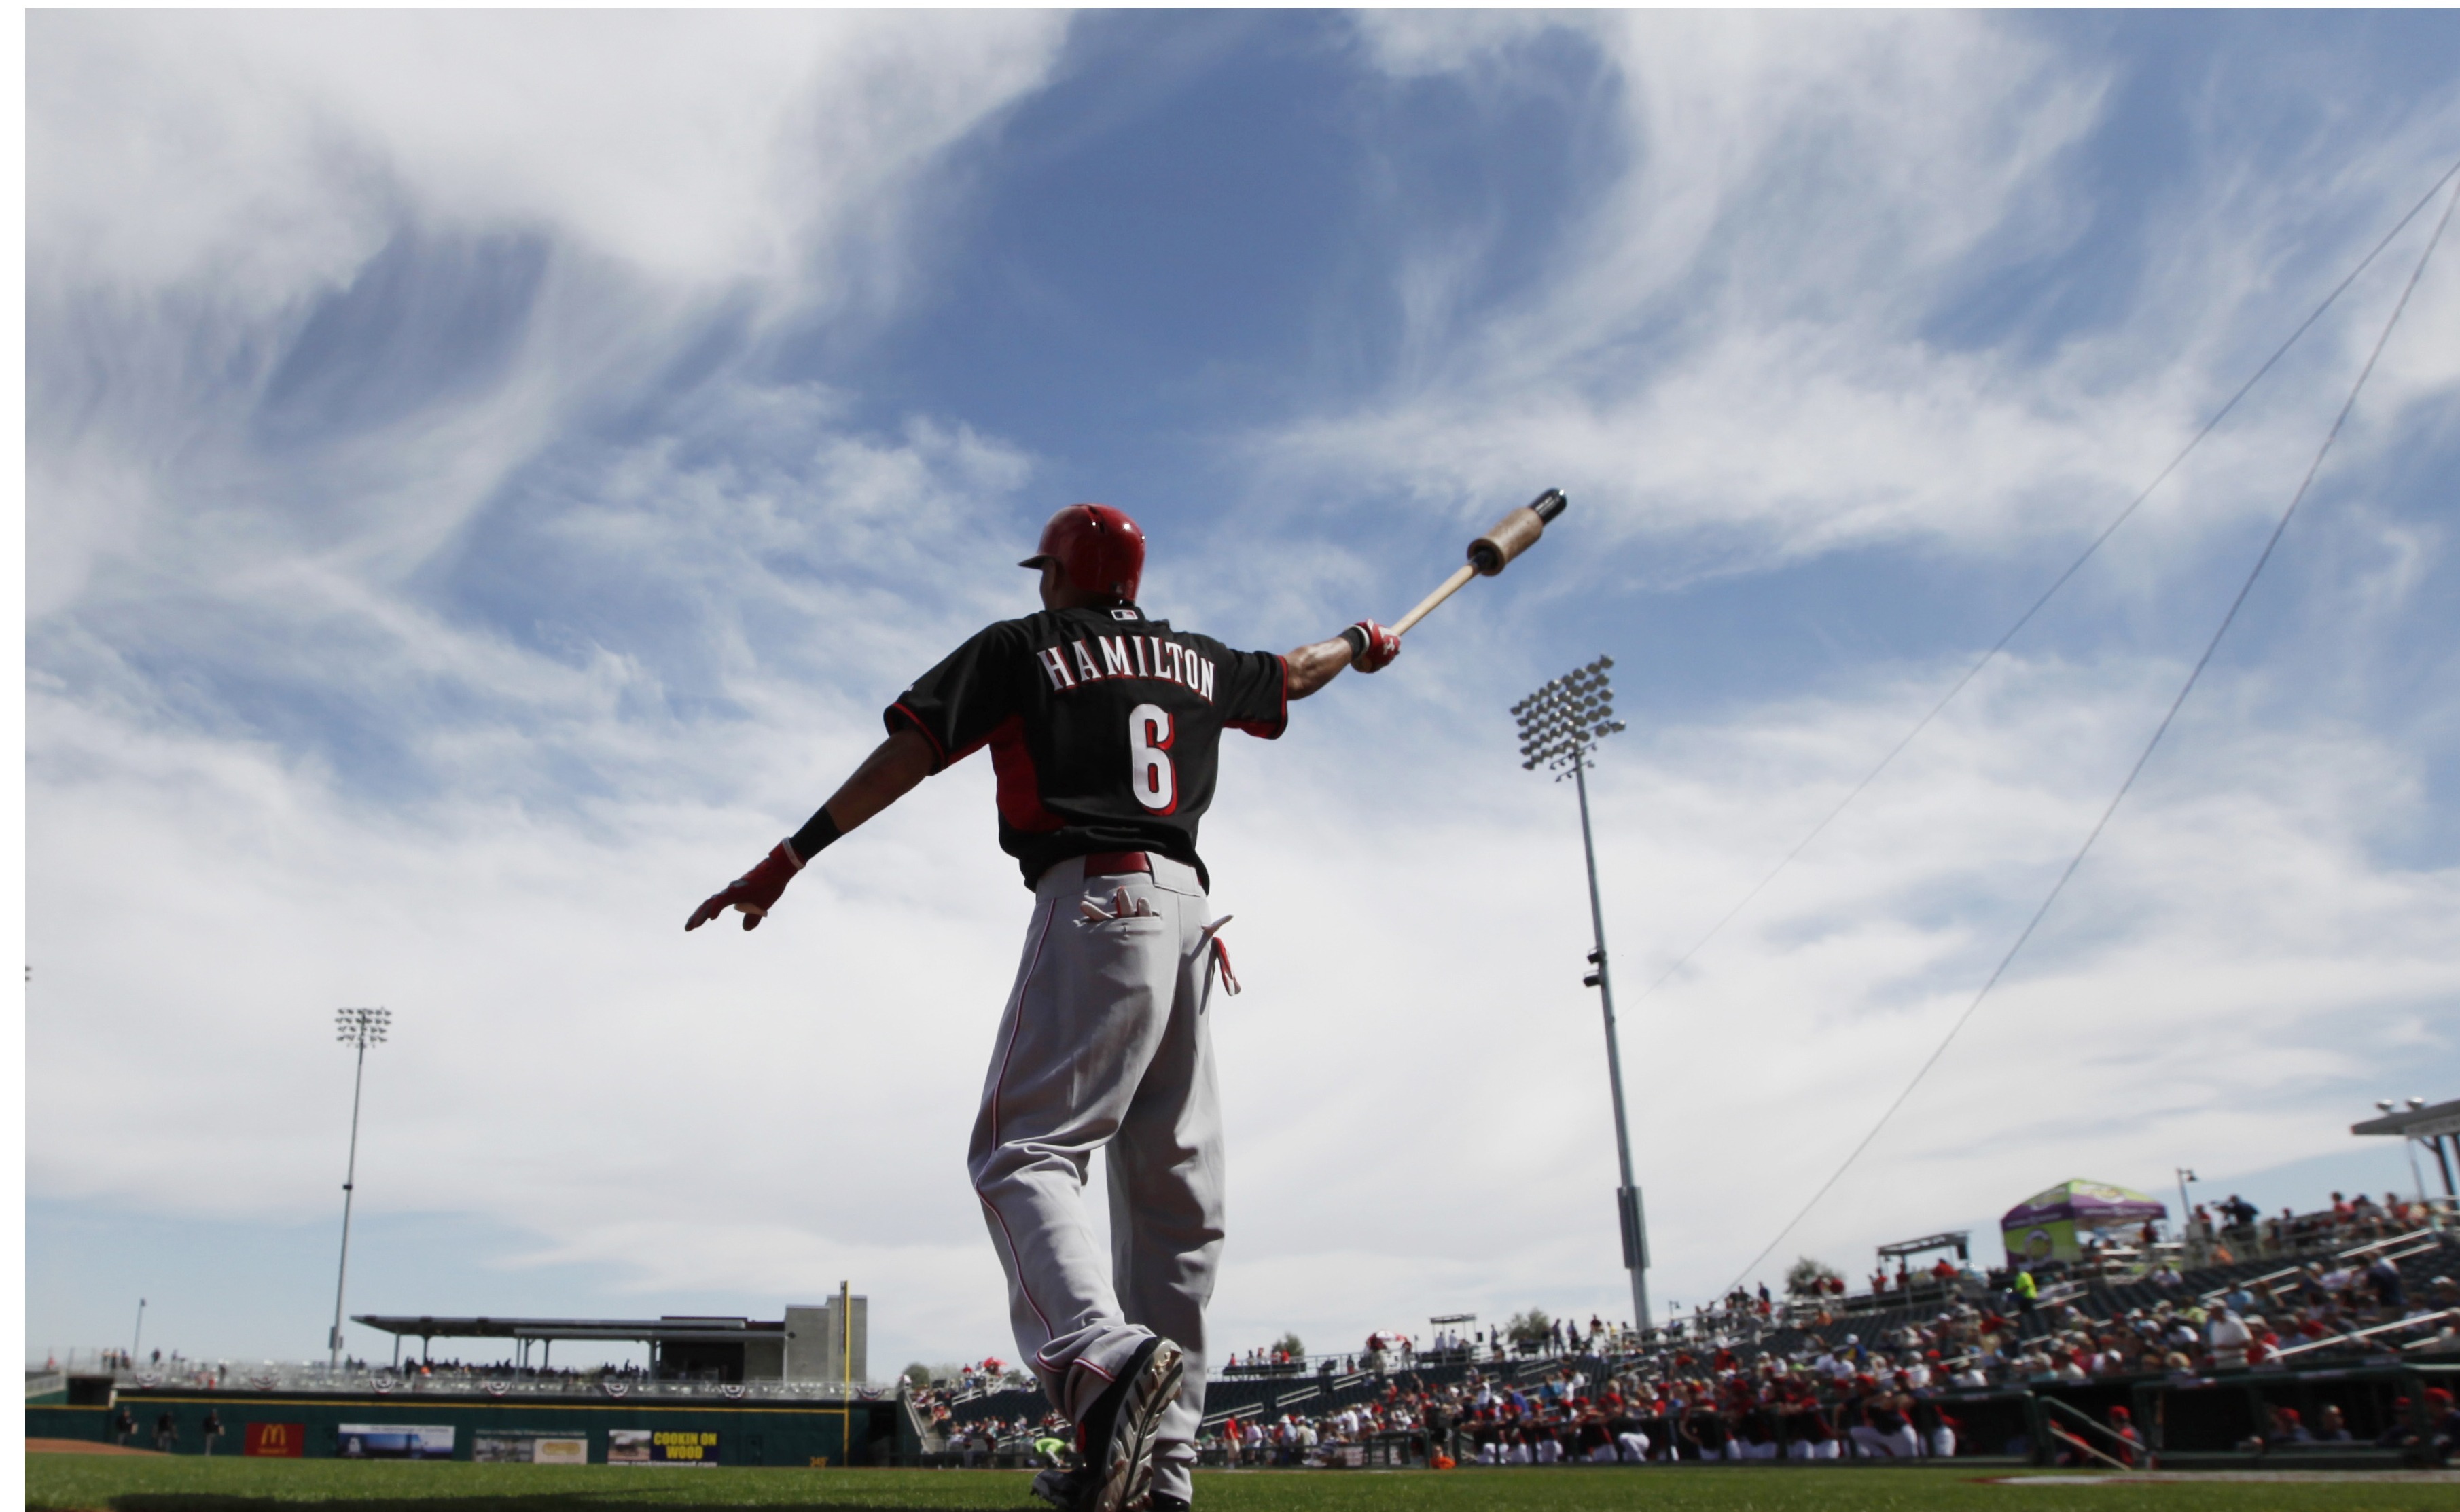 In 2012 Hamilton swiped 155 bases in the minors, a new professional record (Paul Sancya—AP)